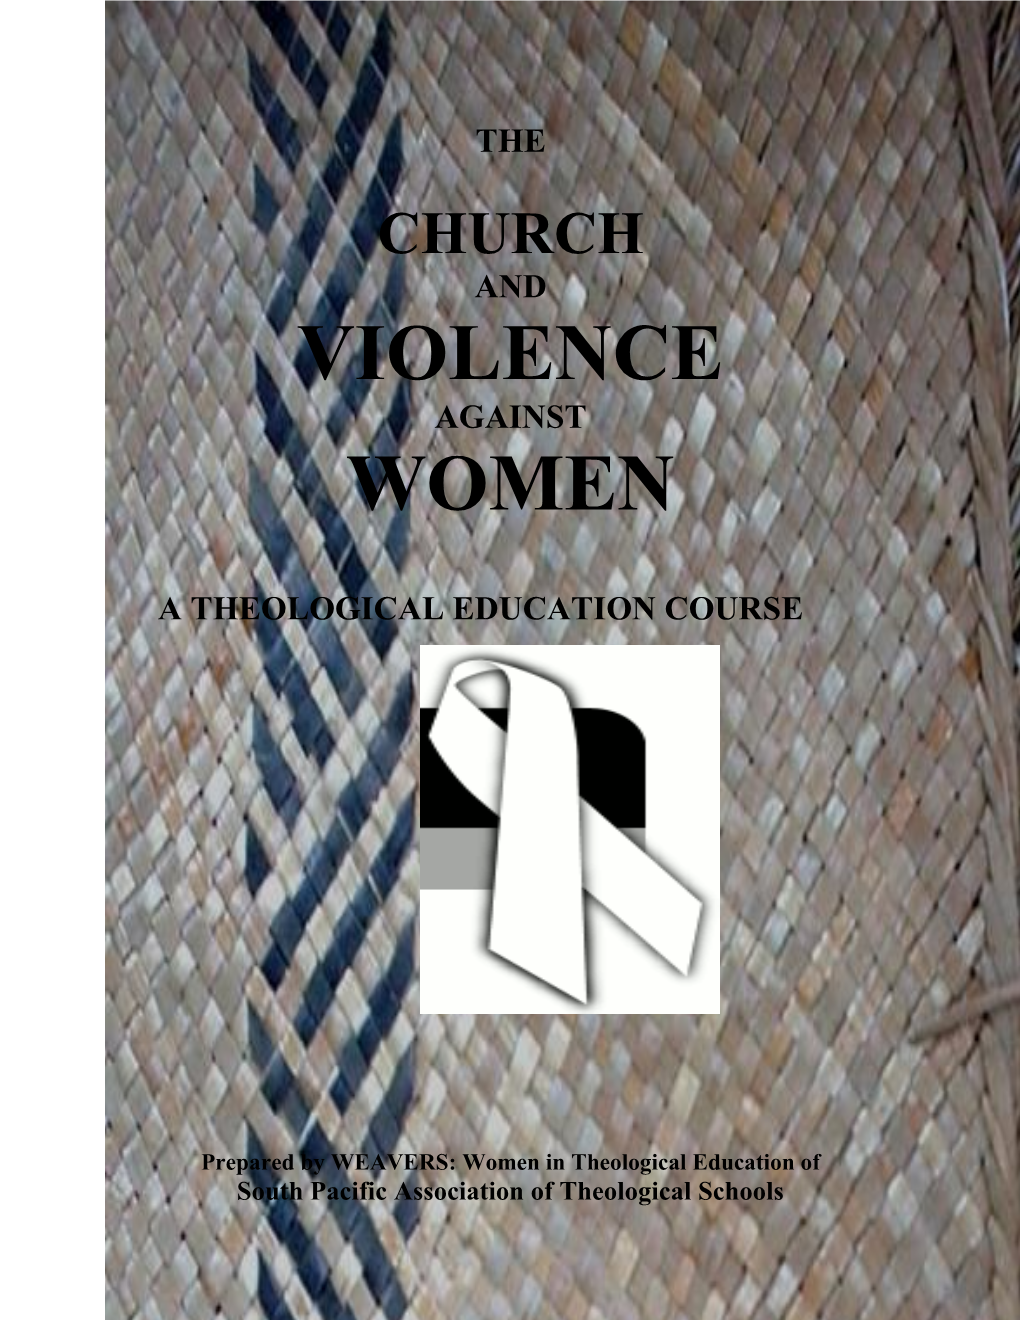 The Church and Violence Against Women